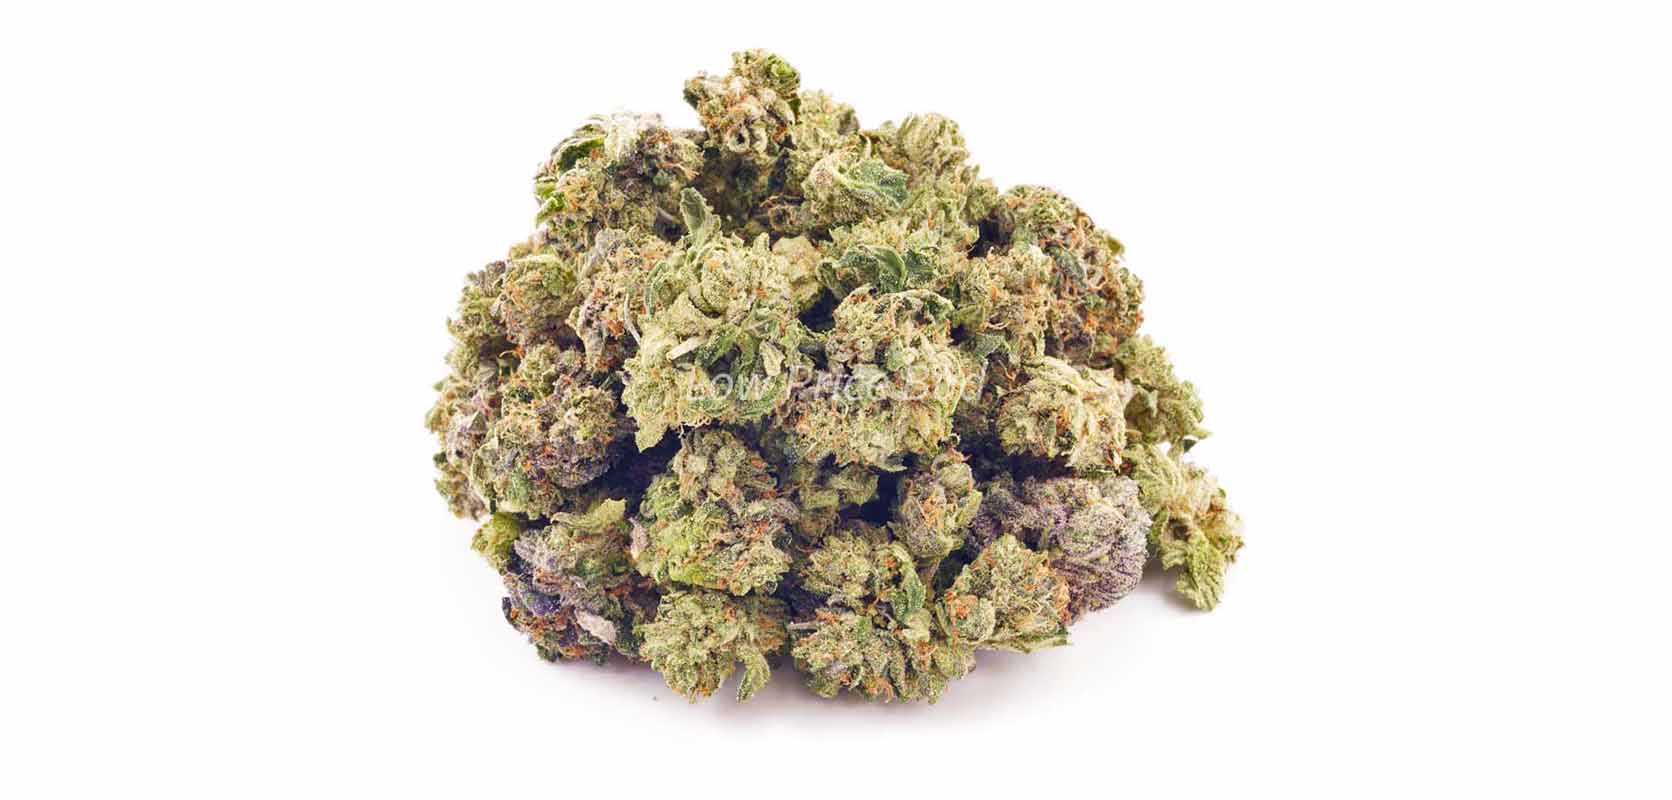 Buy this high-quality, AAAA grade Pink Bubba flower for cheap at Canada’s top online dispensary LowPriceBud.